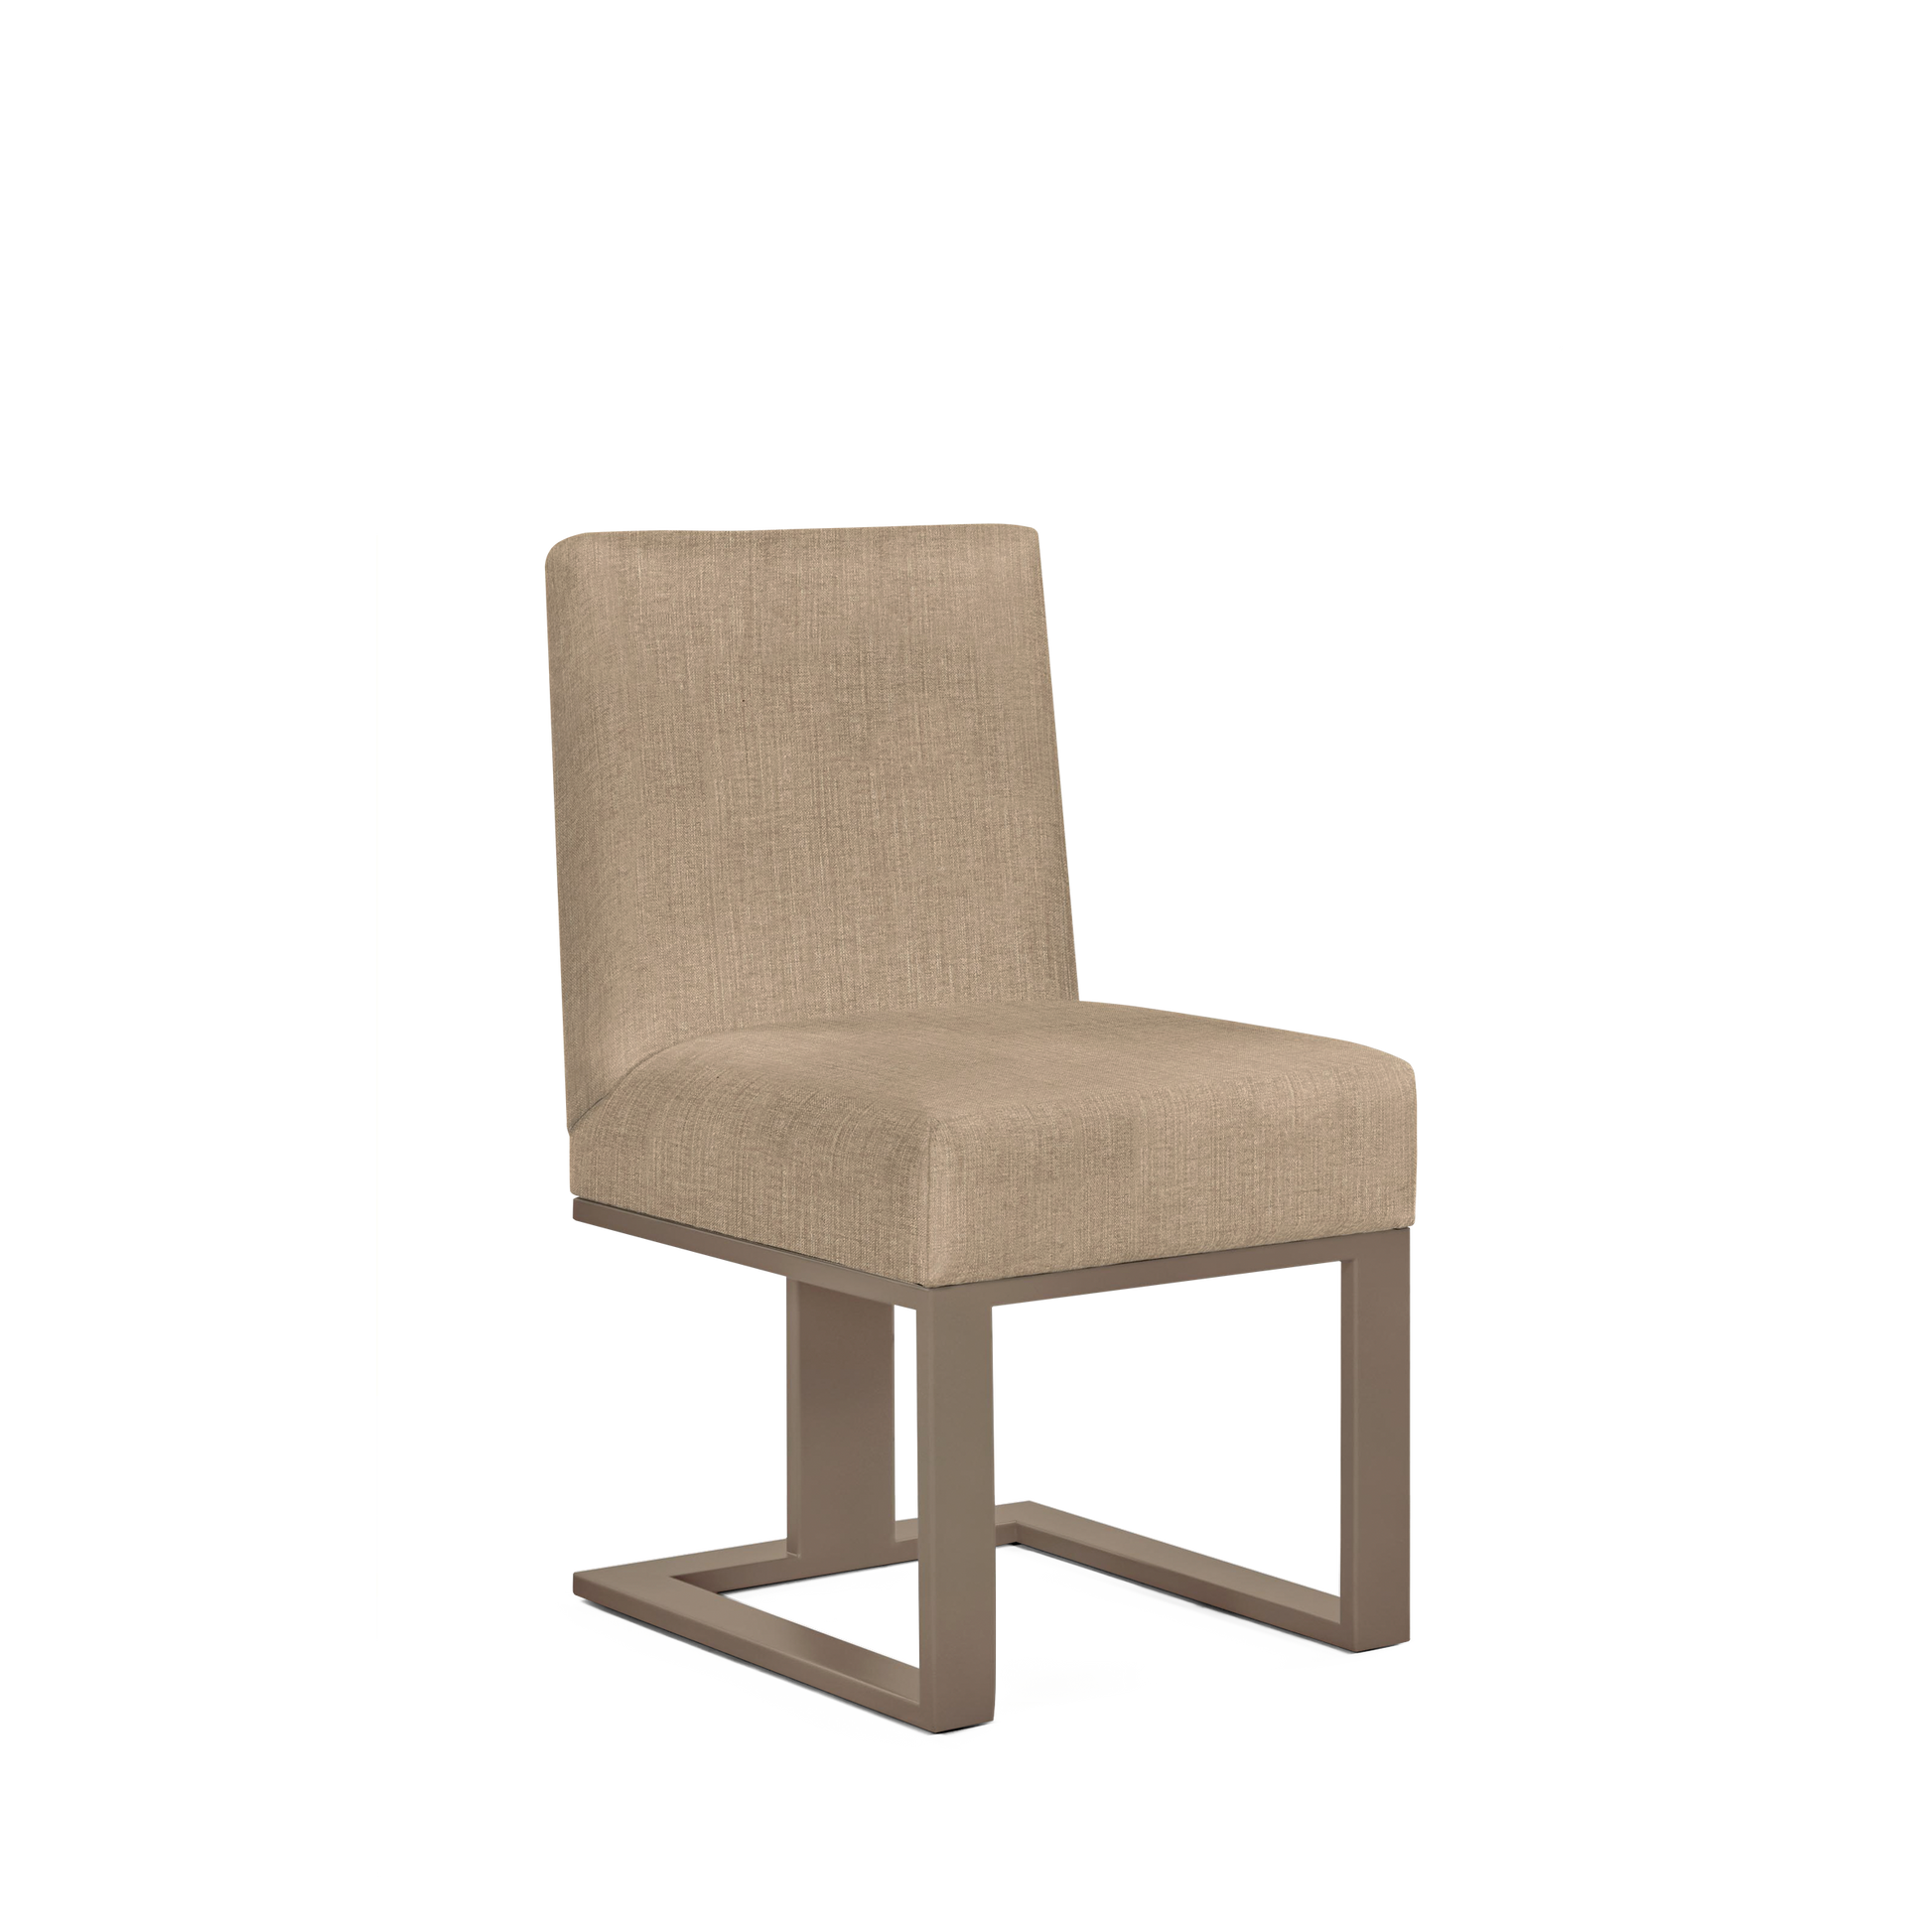 Len chair with khaki textile and champagne wood legs 